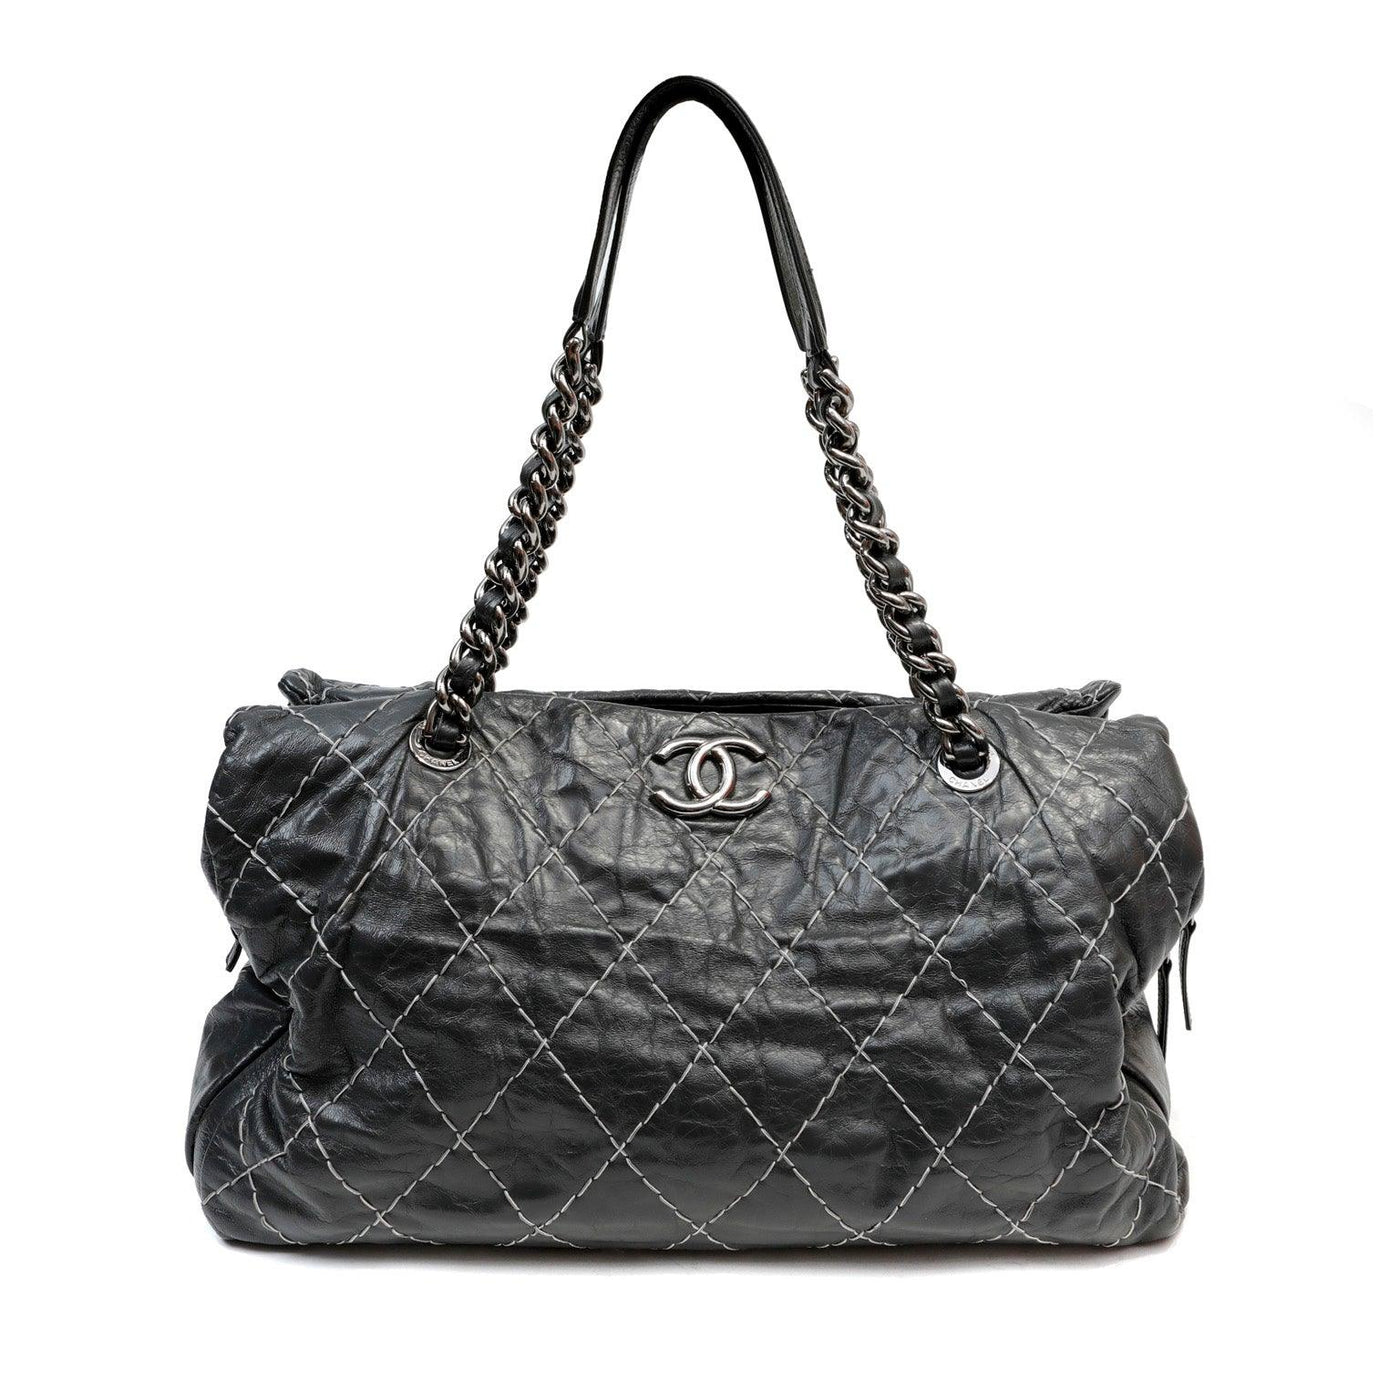 Chanel Slate Topstitched Distressed Leather Large Tote - Only Authentics